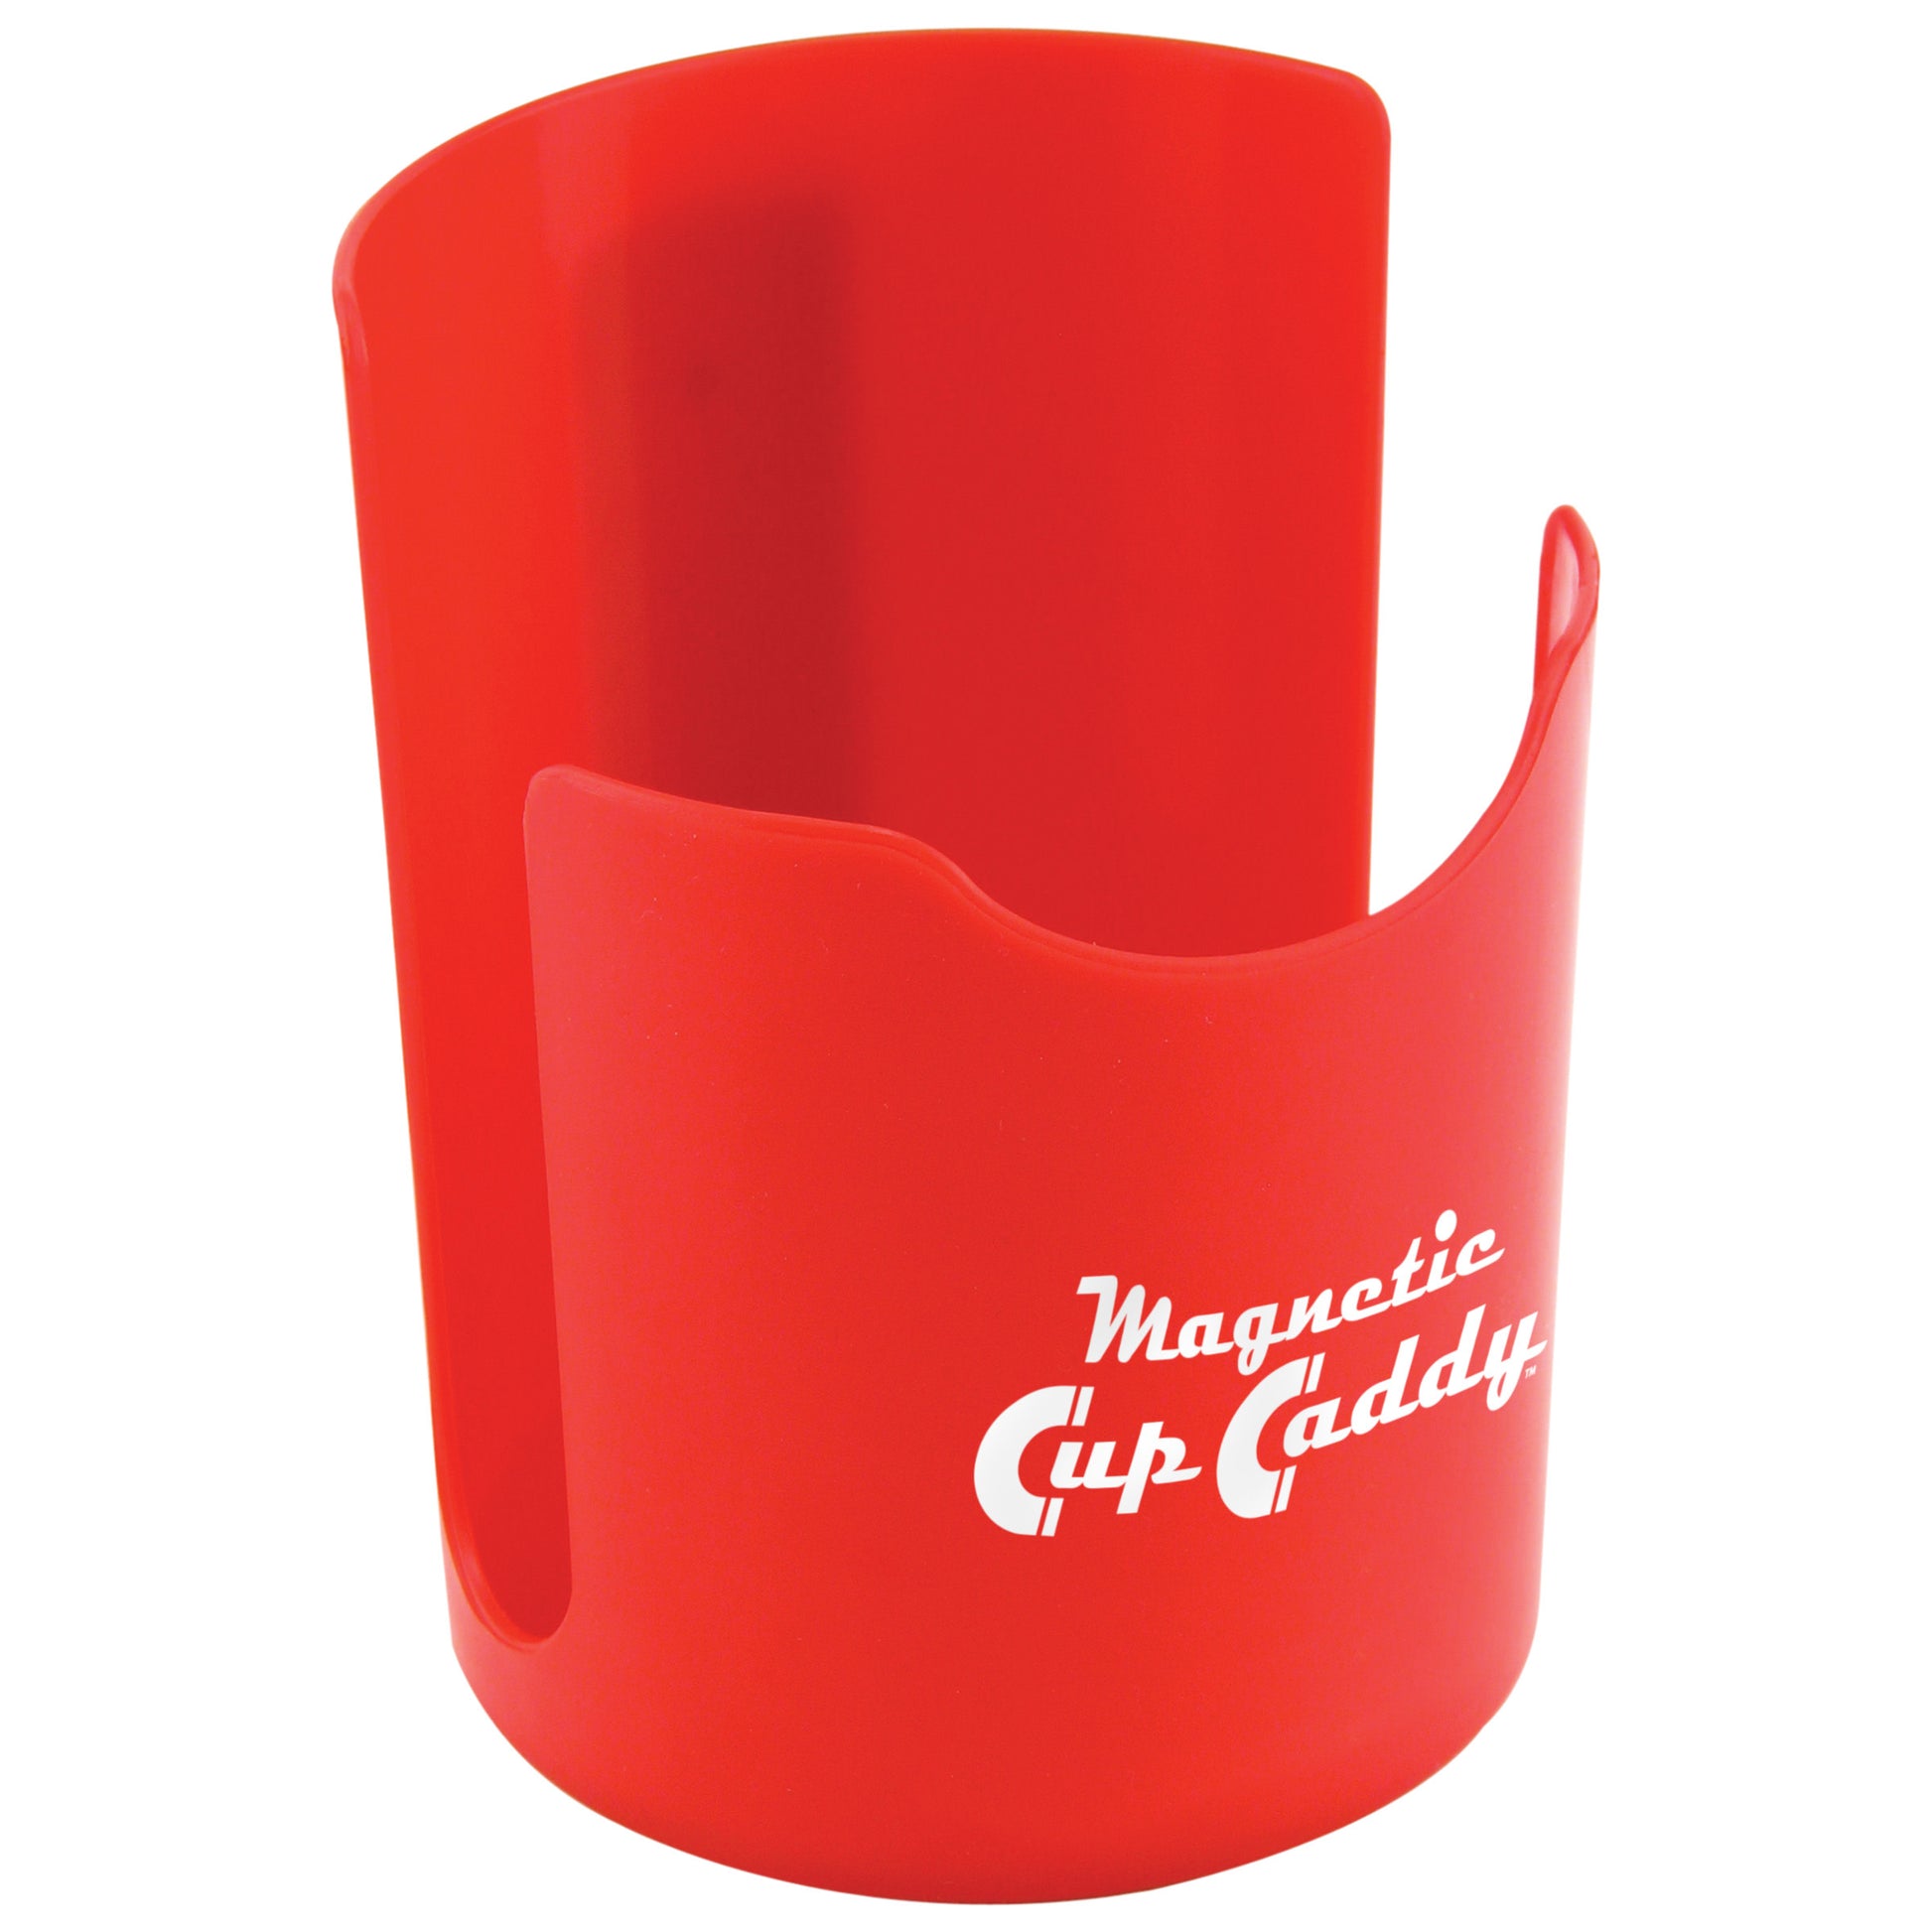 Load image into Gallery viewer, 07615 Magnetic Cup Caddy™ Plus, Red - Packaging